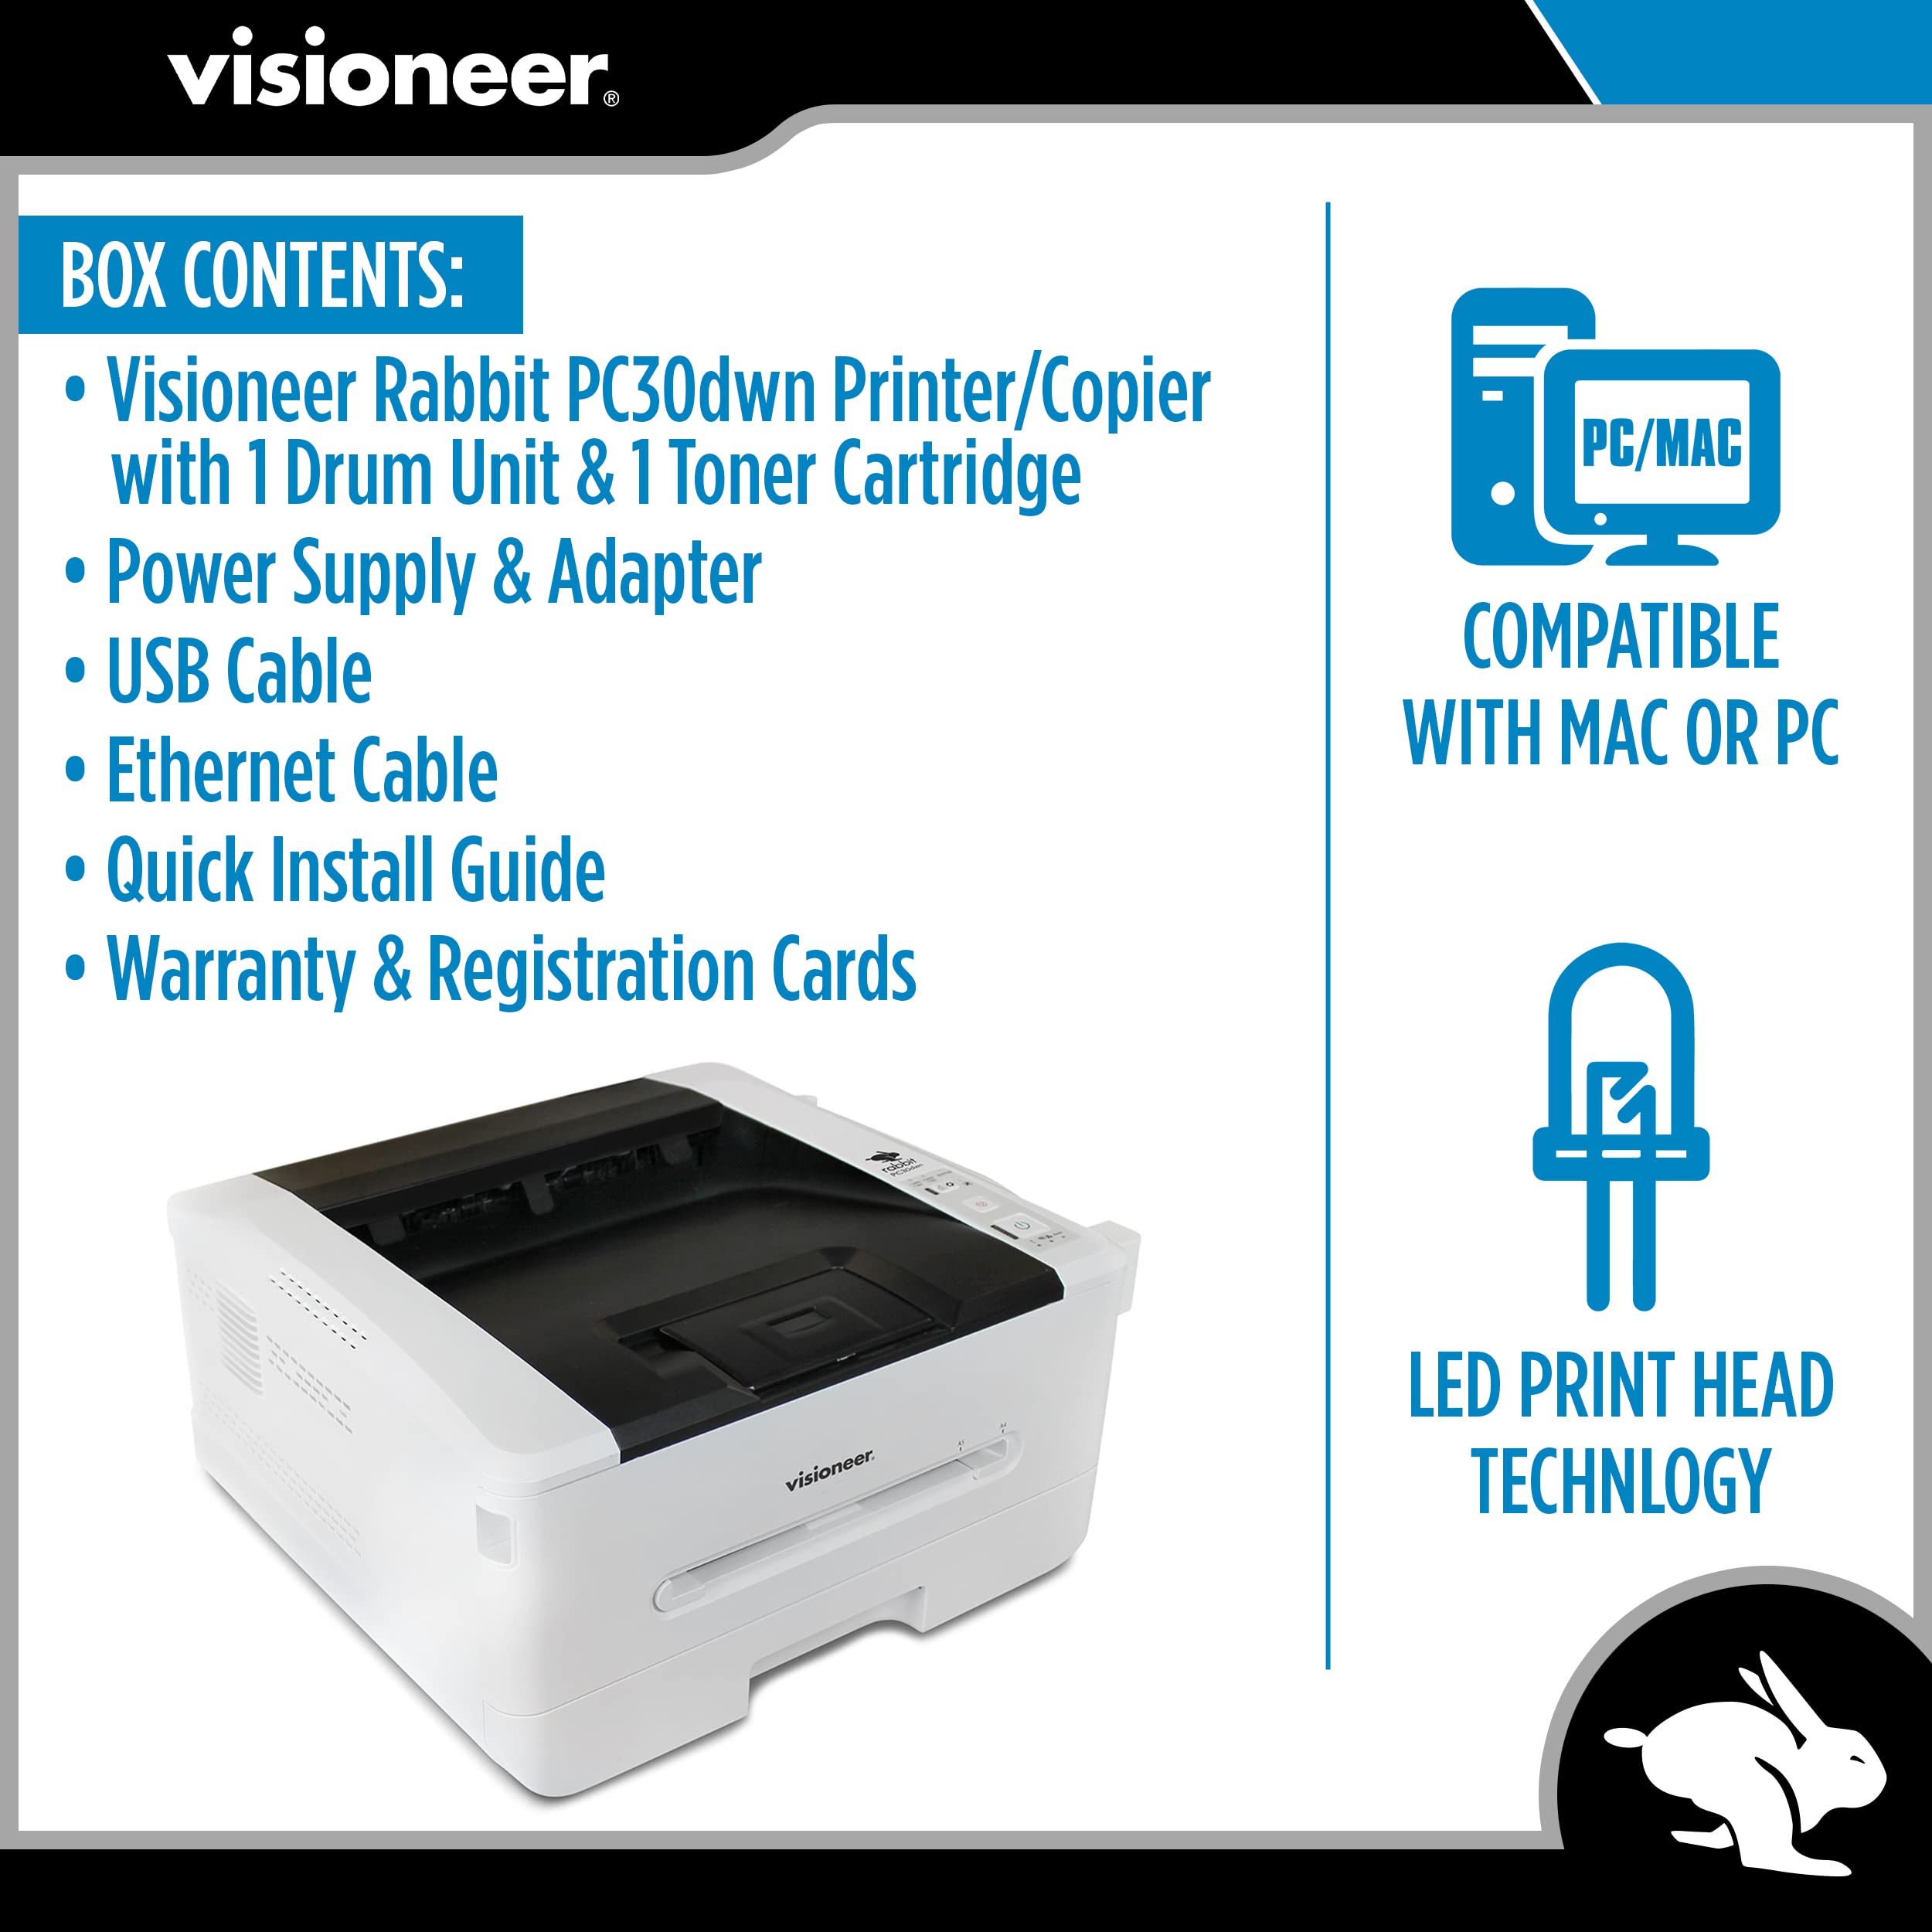 Visioneer Rabbit PC30dwn Laser Printer/Copy Machine, Monochrome USB Office Printer and Copier for PC and Mac, 30 PPM, 250 Page Automatic Document Feeder (ADF)